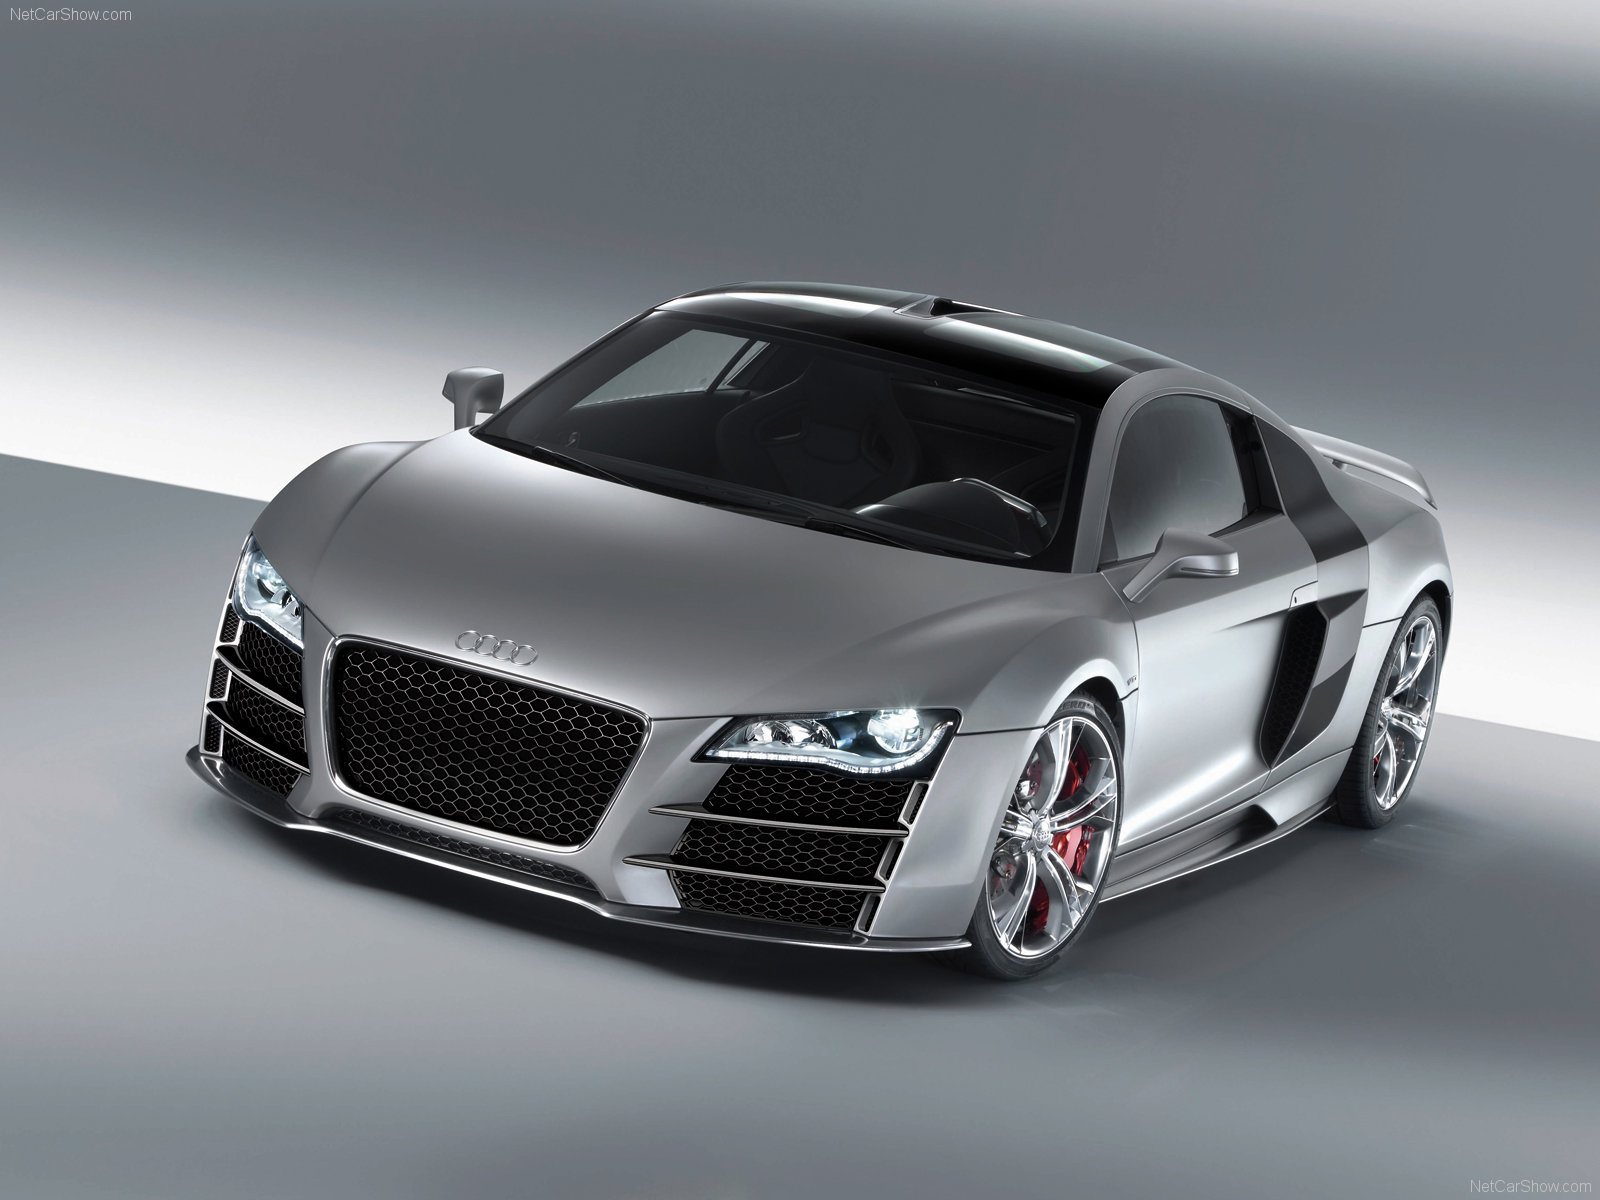 Audi R8 picture 51002 Audi photo gallery CarsBasecom